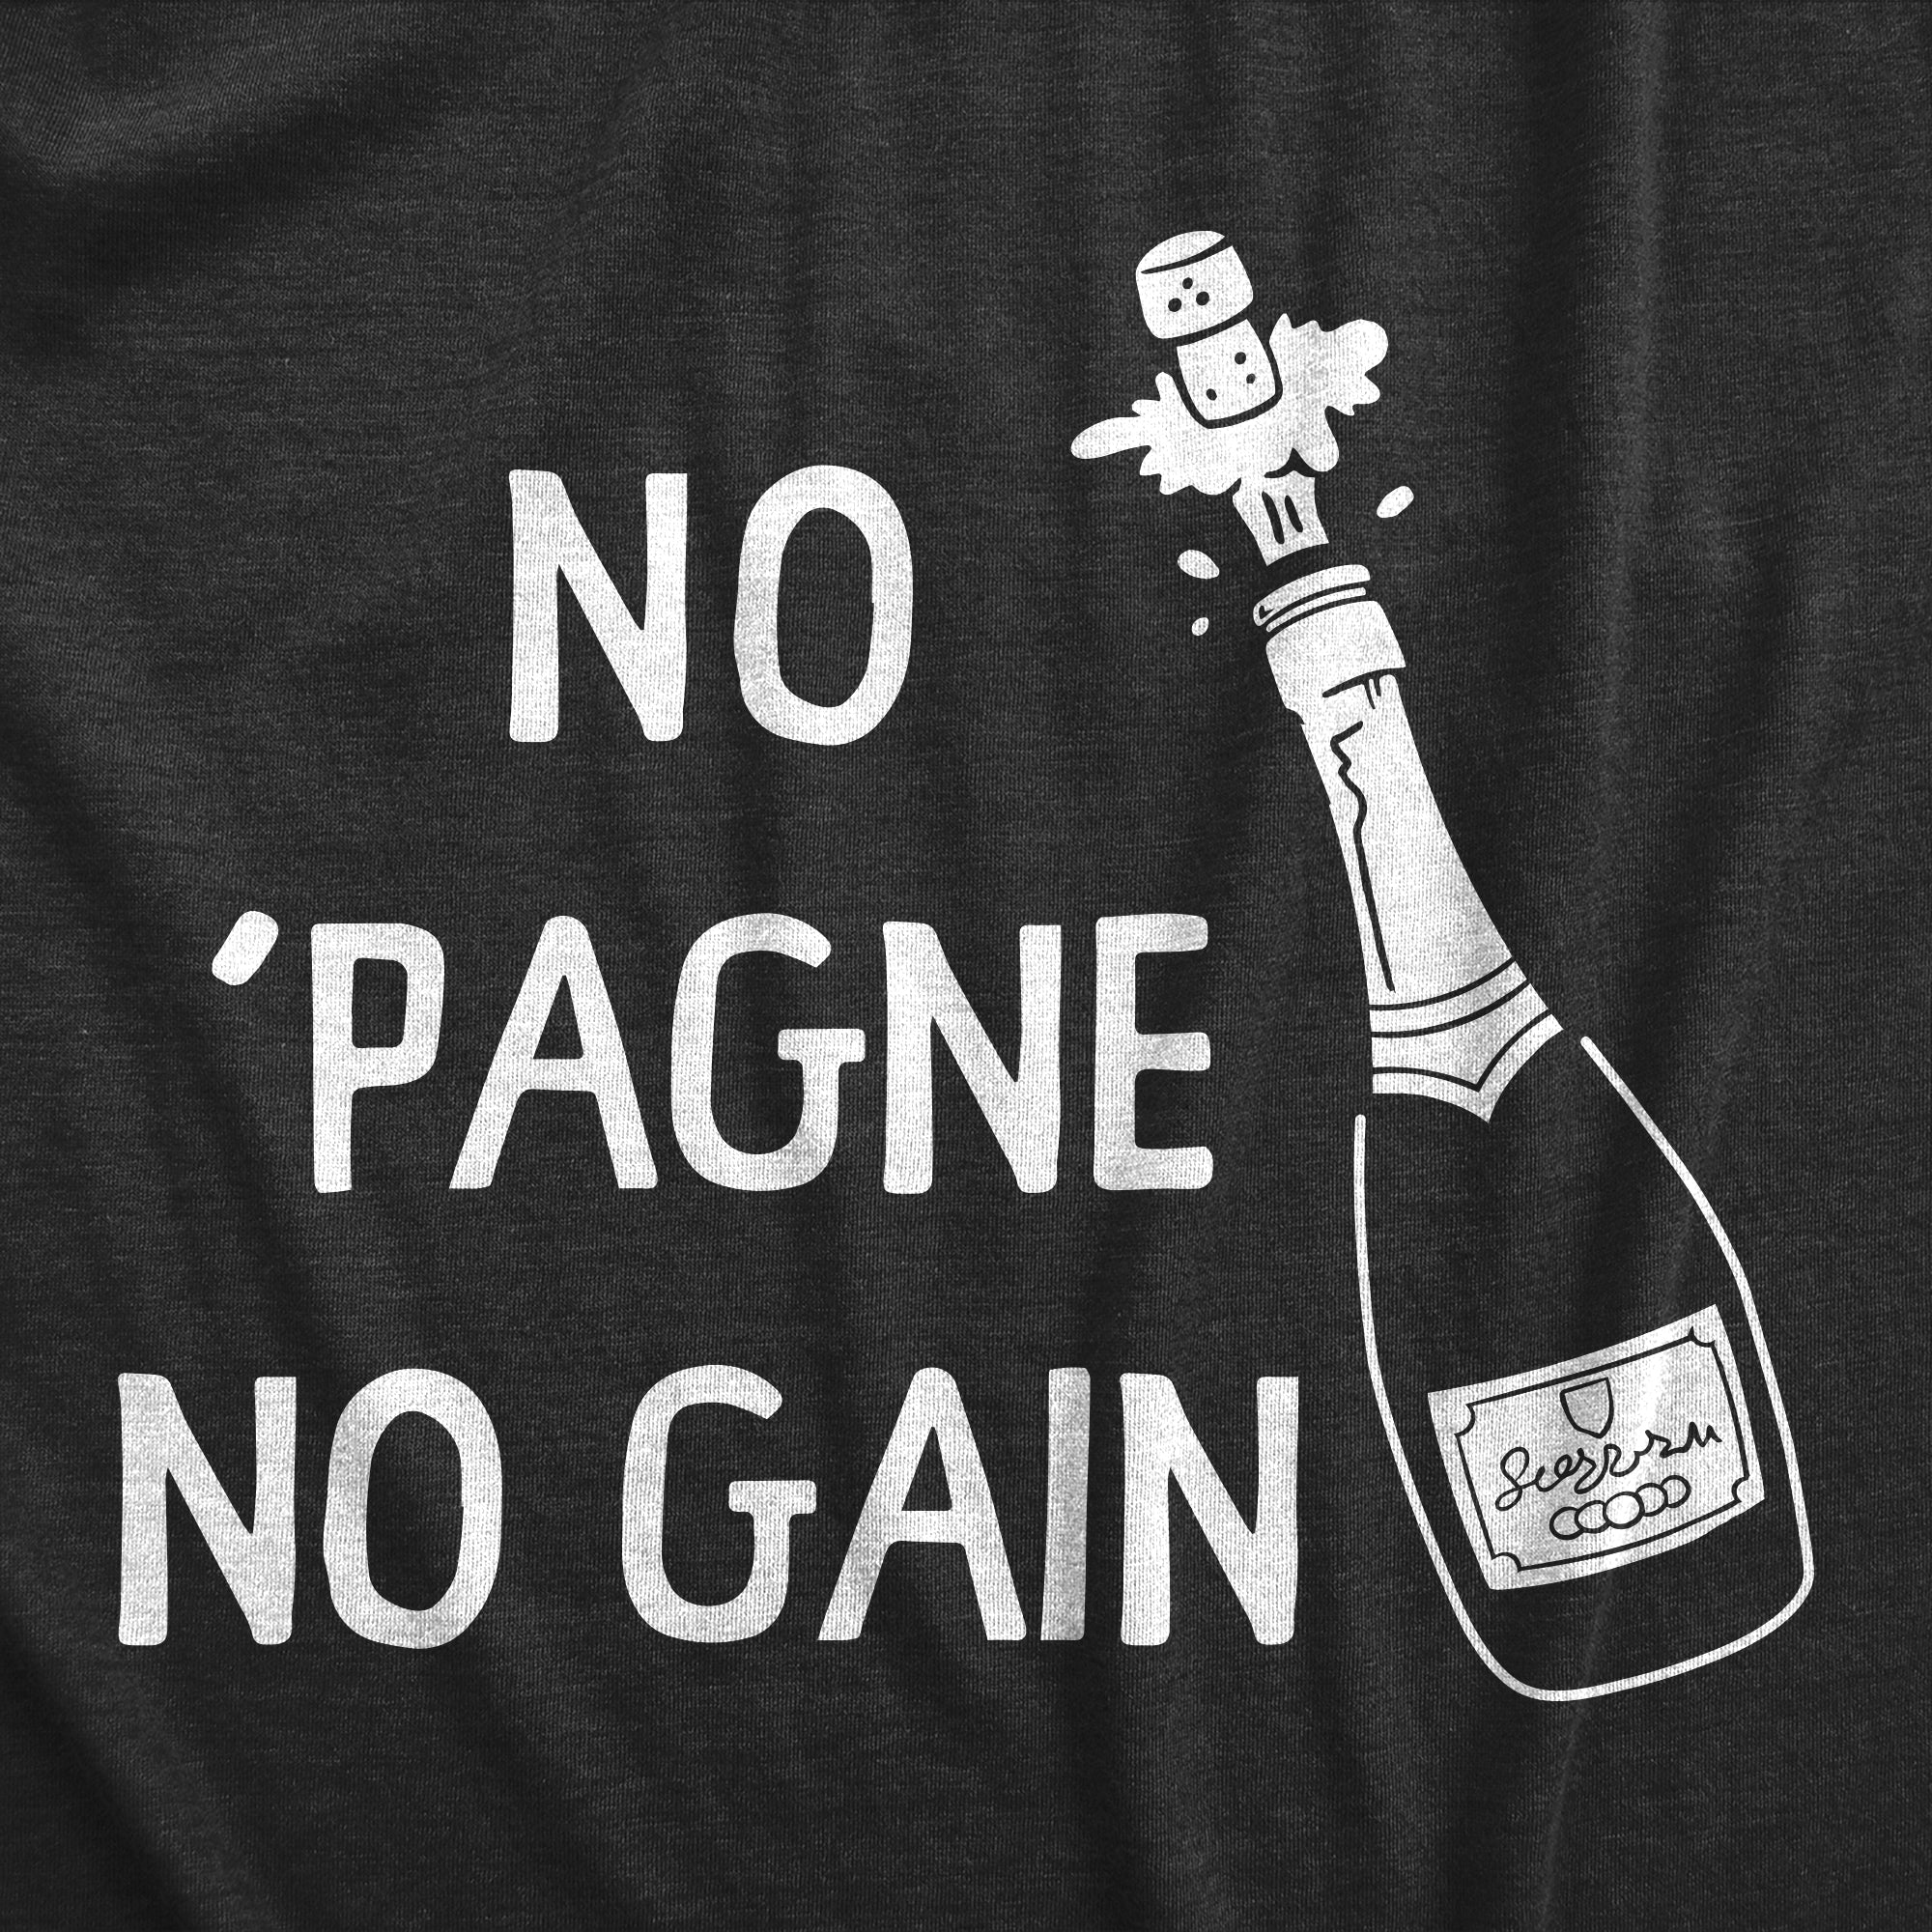 Funny Heather Black - GAIN No Pagne No Gain Mens T Shirt Nerdy Drinking sarcastic Tee